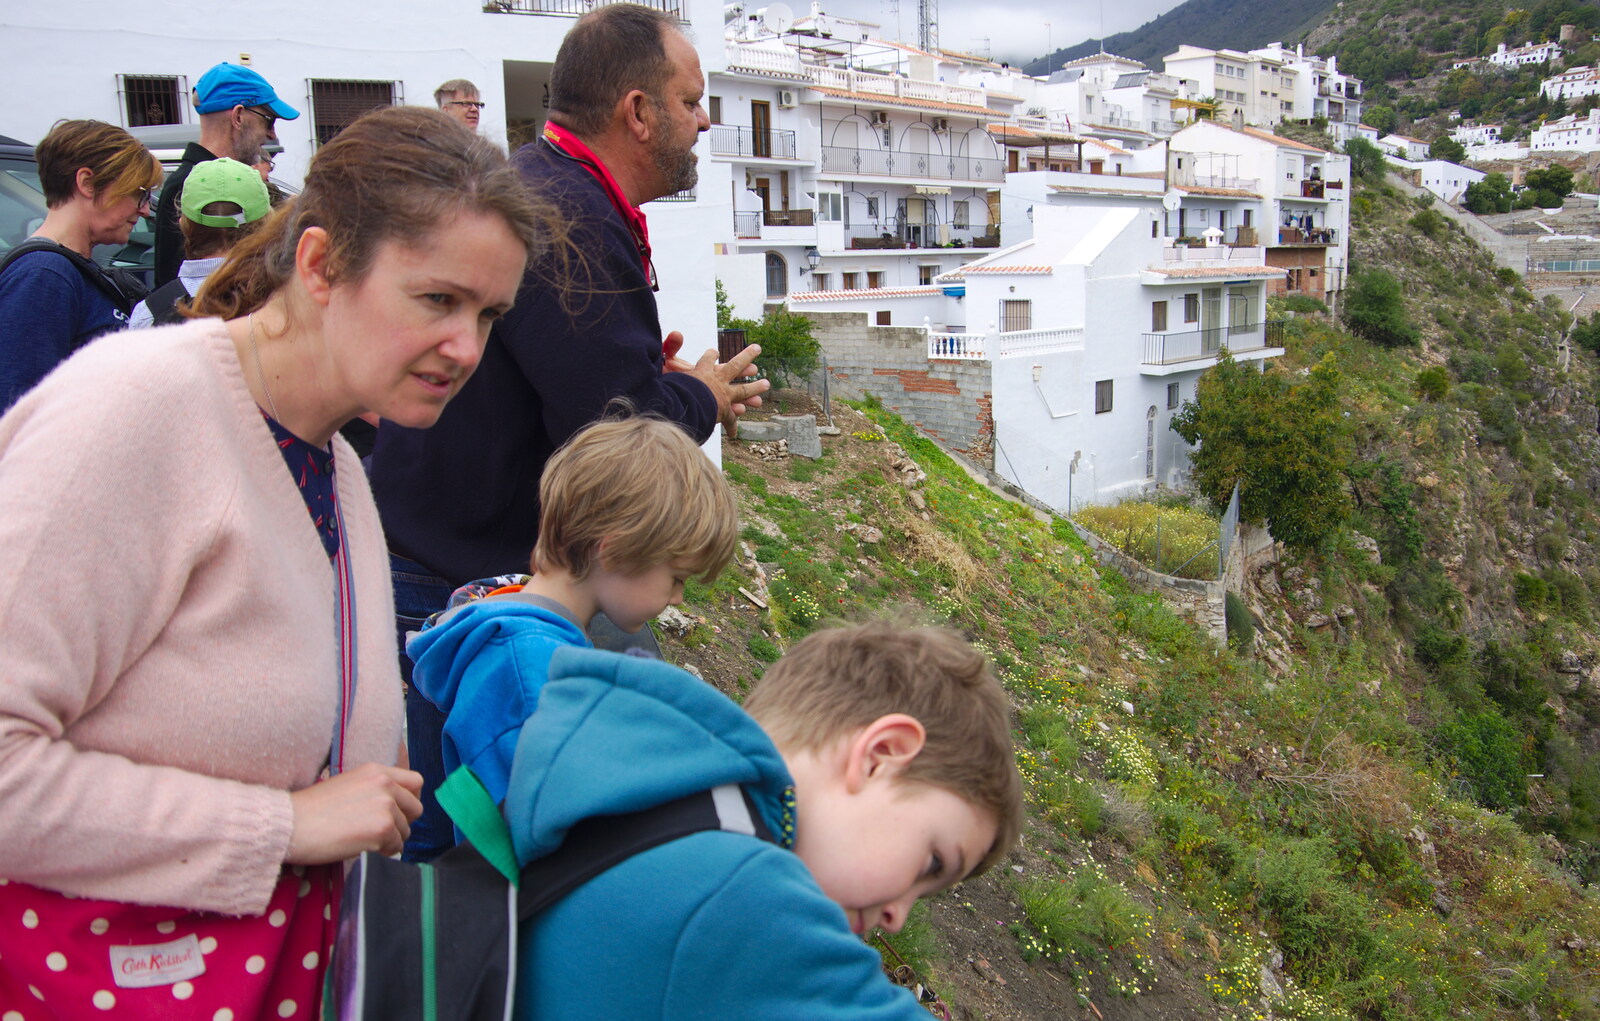 Harry and Fred peer over the edge from The Caves of Nerja, and Frigiliana, Andalusia, Spain - 18th April 2019